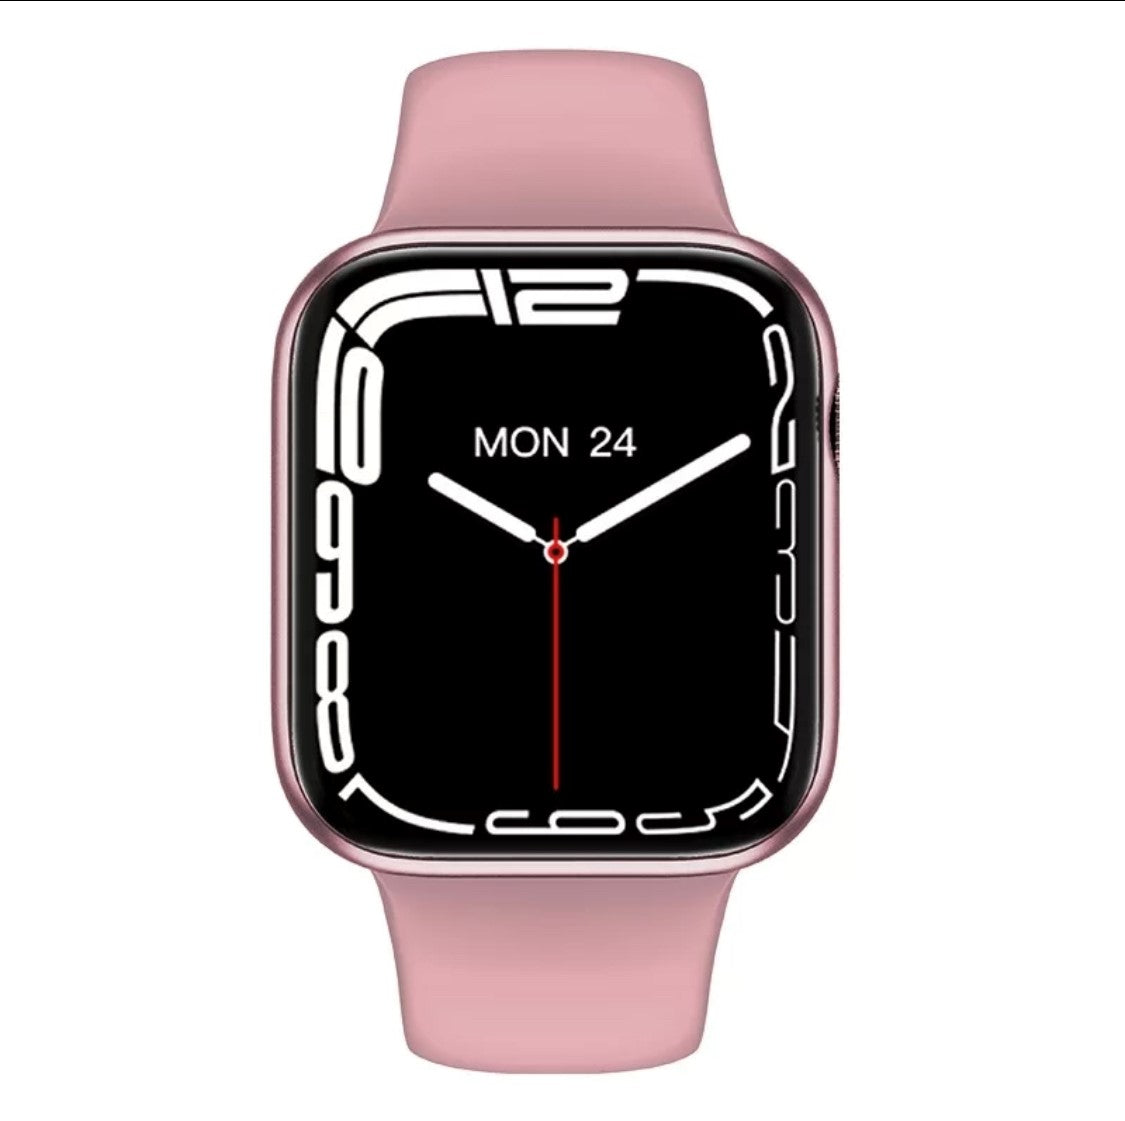 HW 37 Wearfit Professional Pink- Verious color Straps availible at R68 Each. Smart Watch South Africa